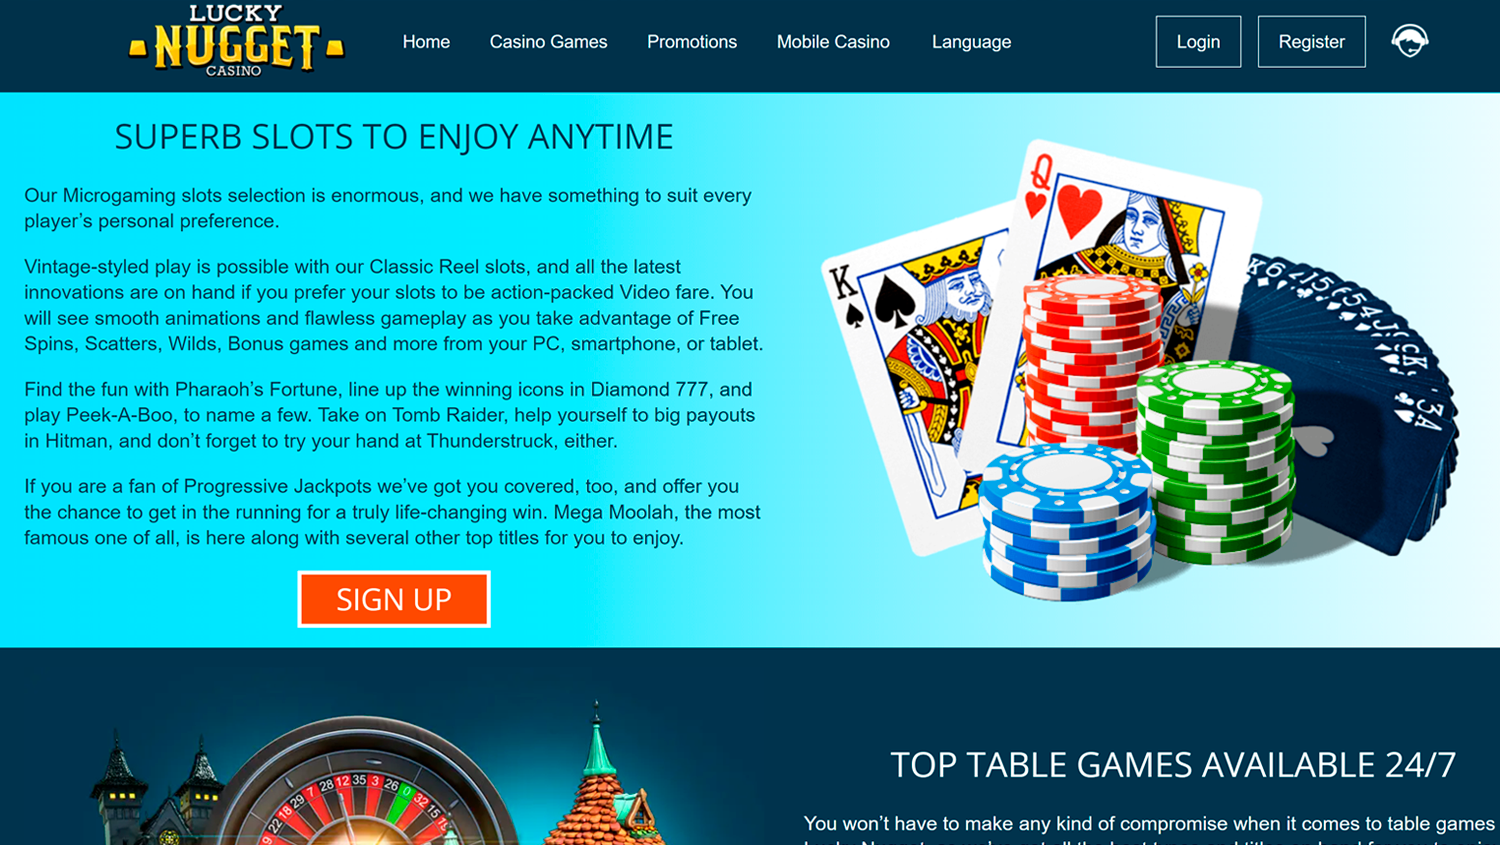 Games on Lucky Nugget Casino site